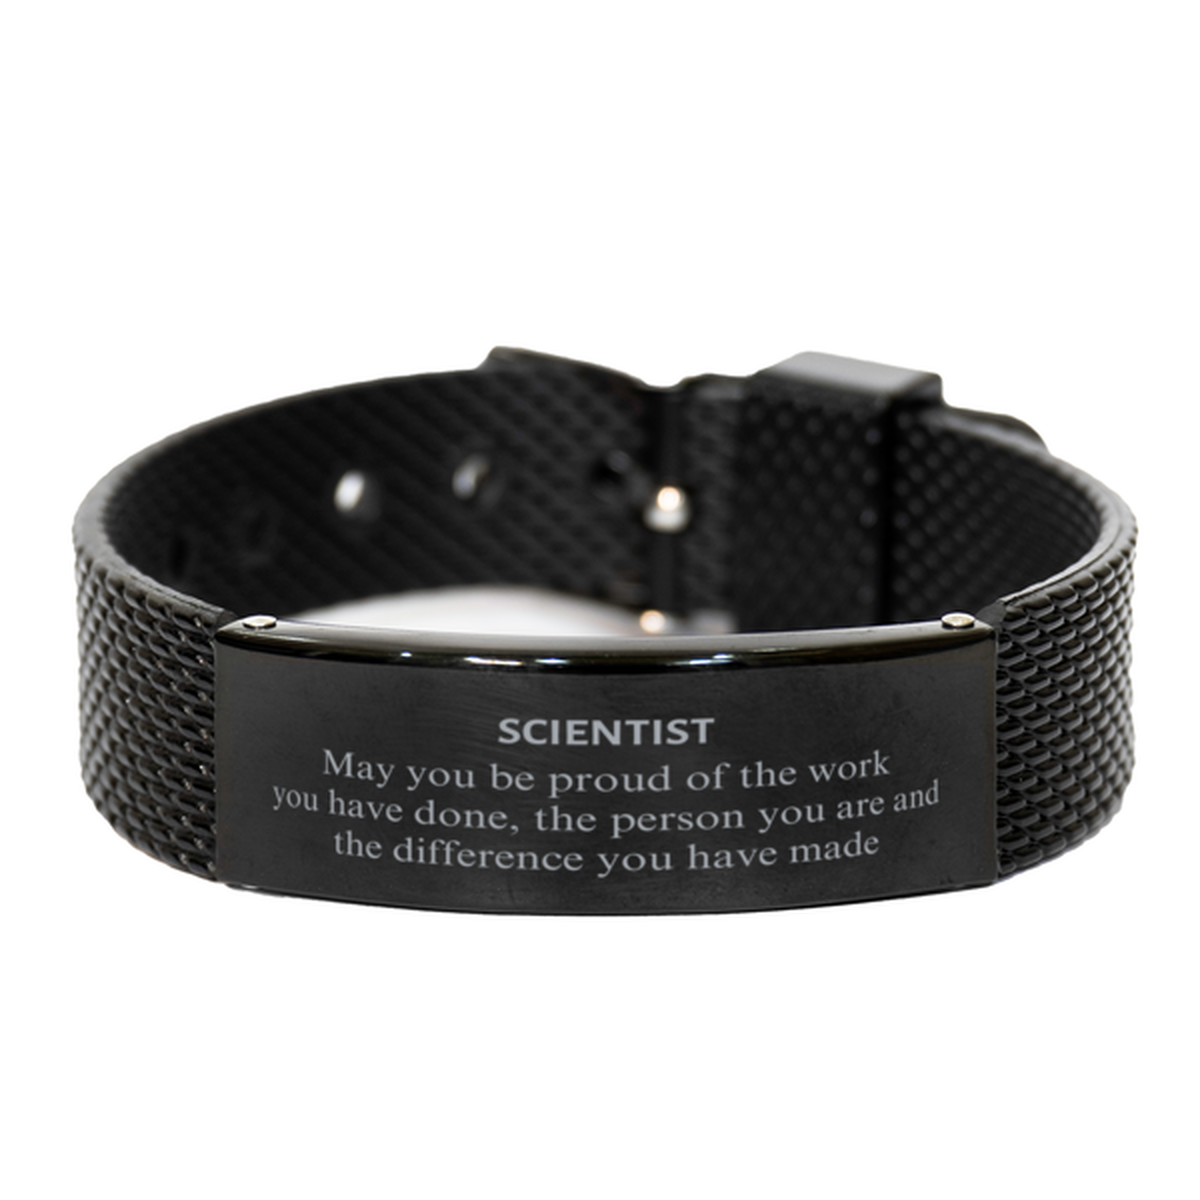 Scientist May you be proud of the work you have done, Retirement Scientist Black Shark Mesh Bracelet for Colleague Appreciation Gifts Amazing for Scientist